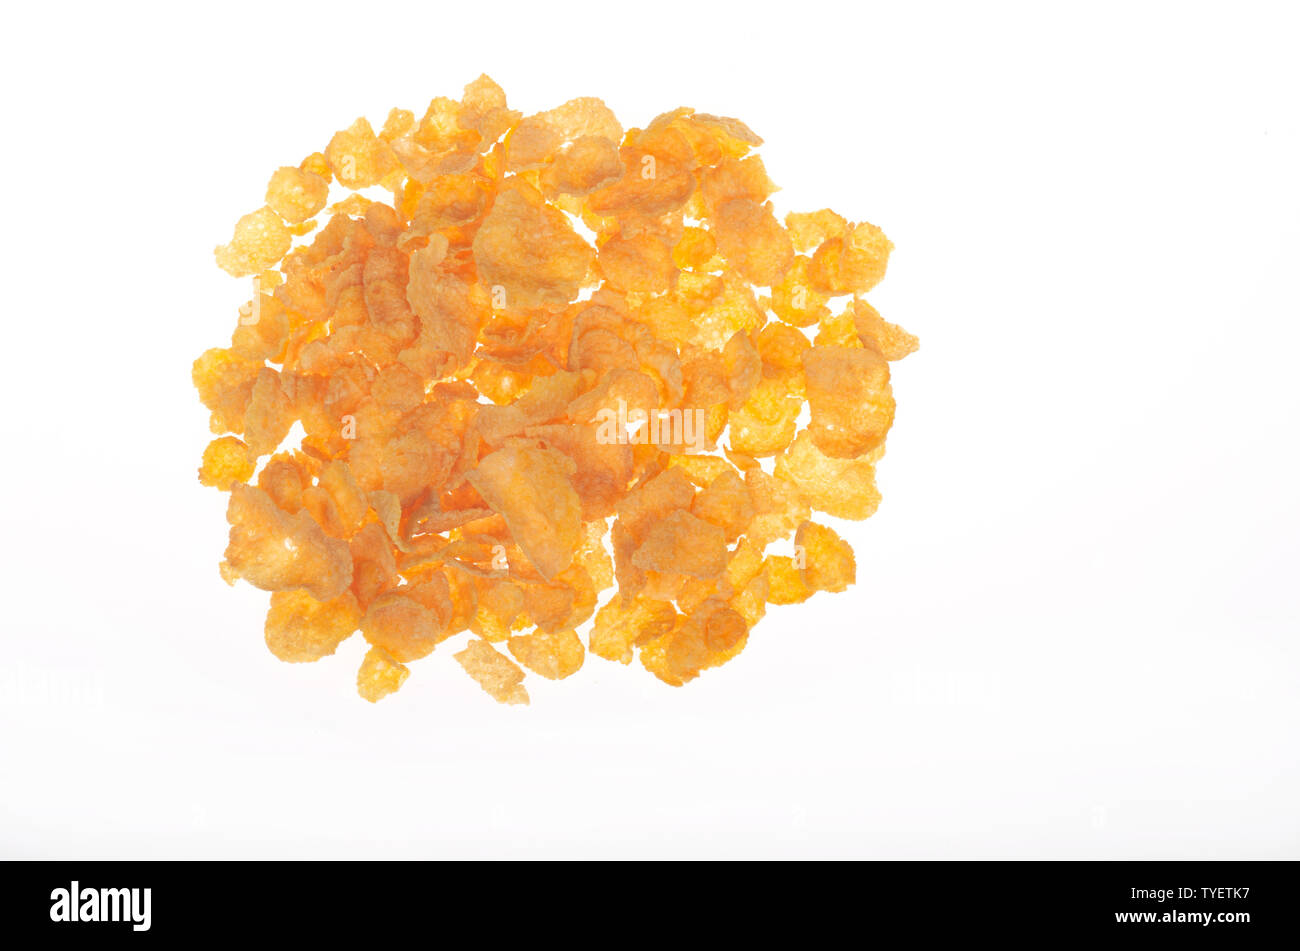 Looking down at Kellogg's Corn Flakes cereal on white Stock Photo